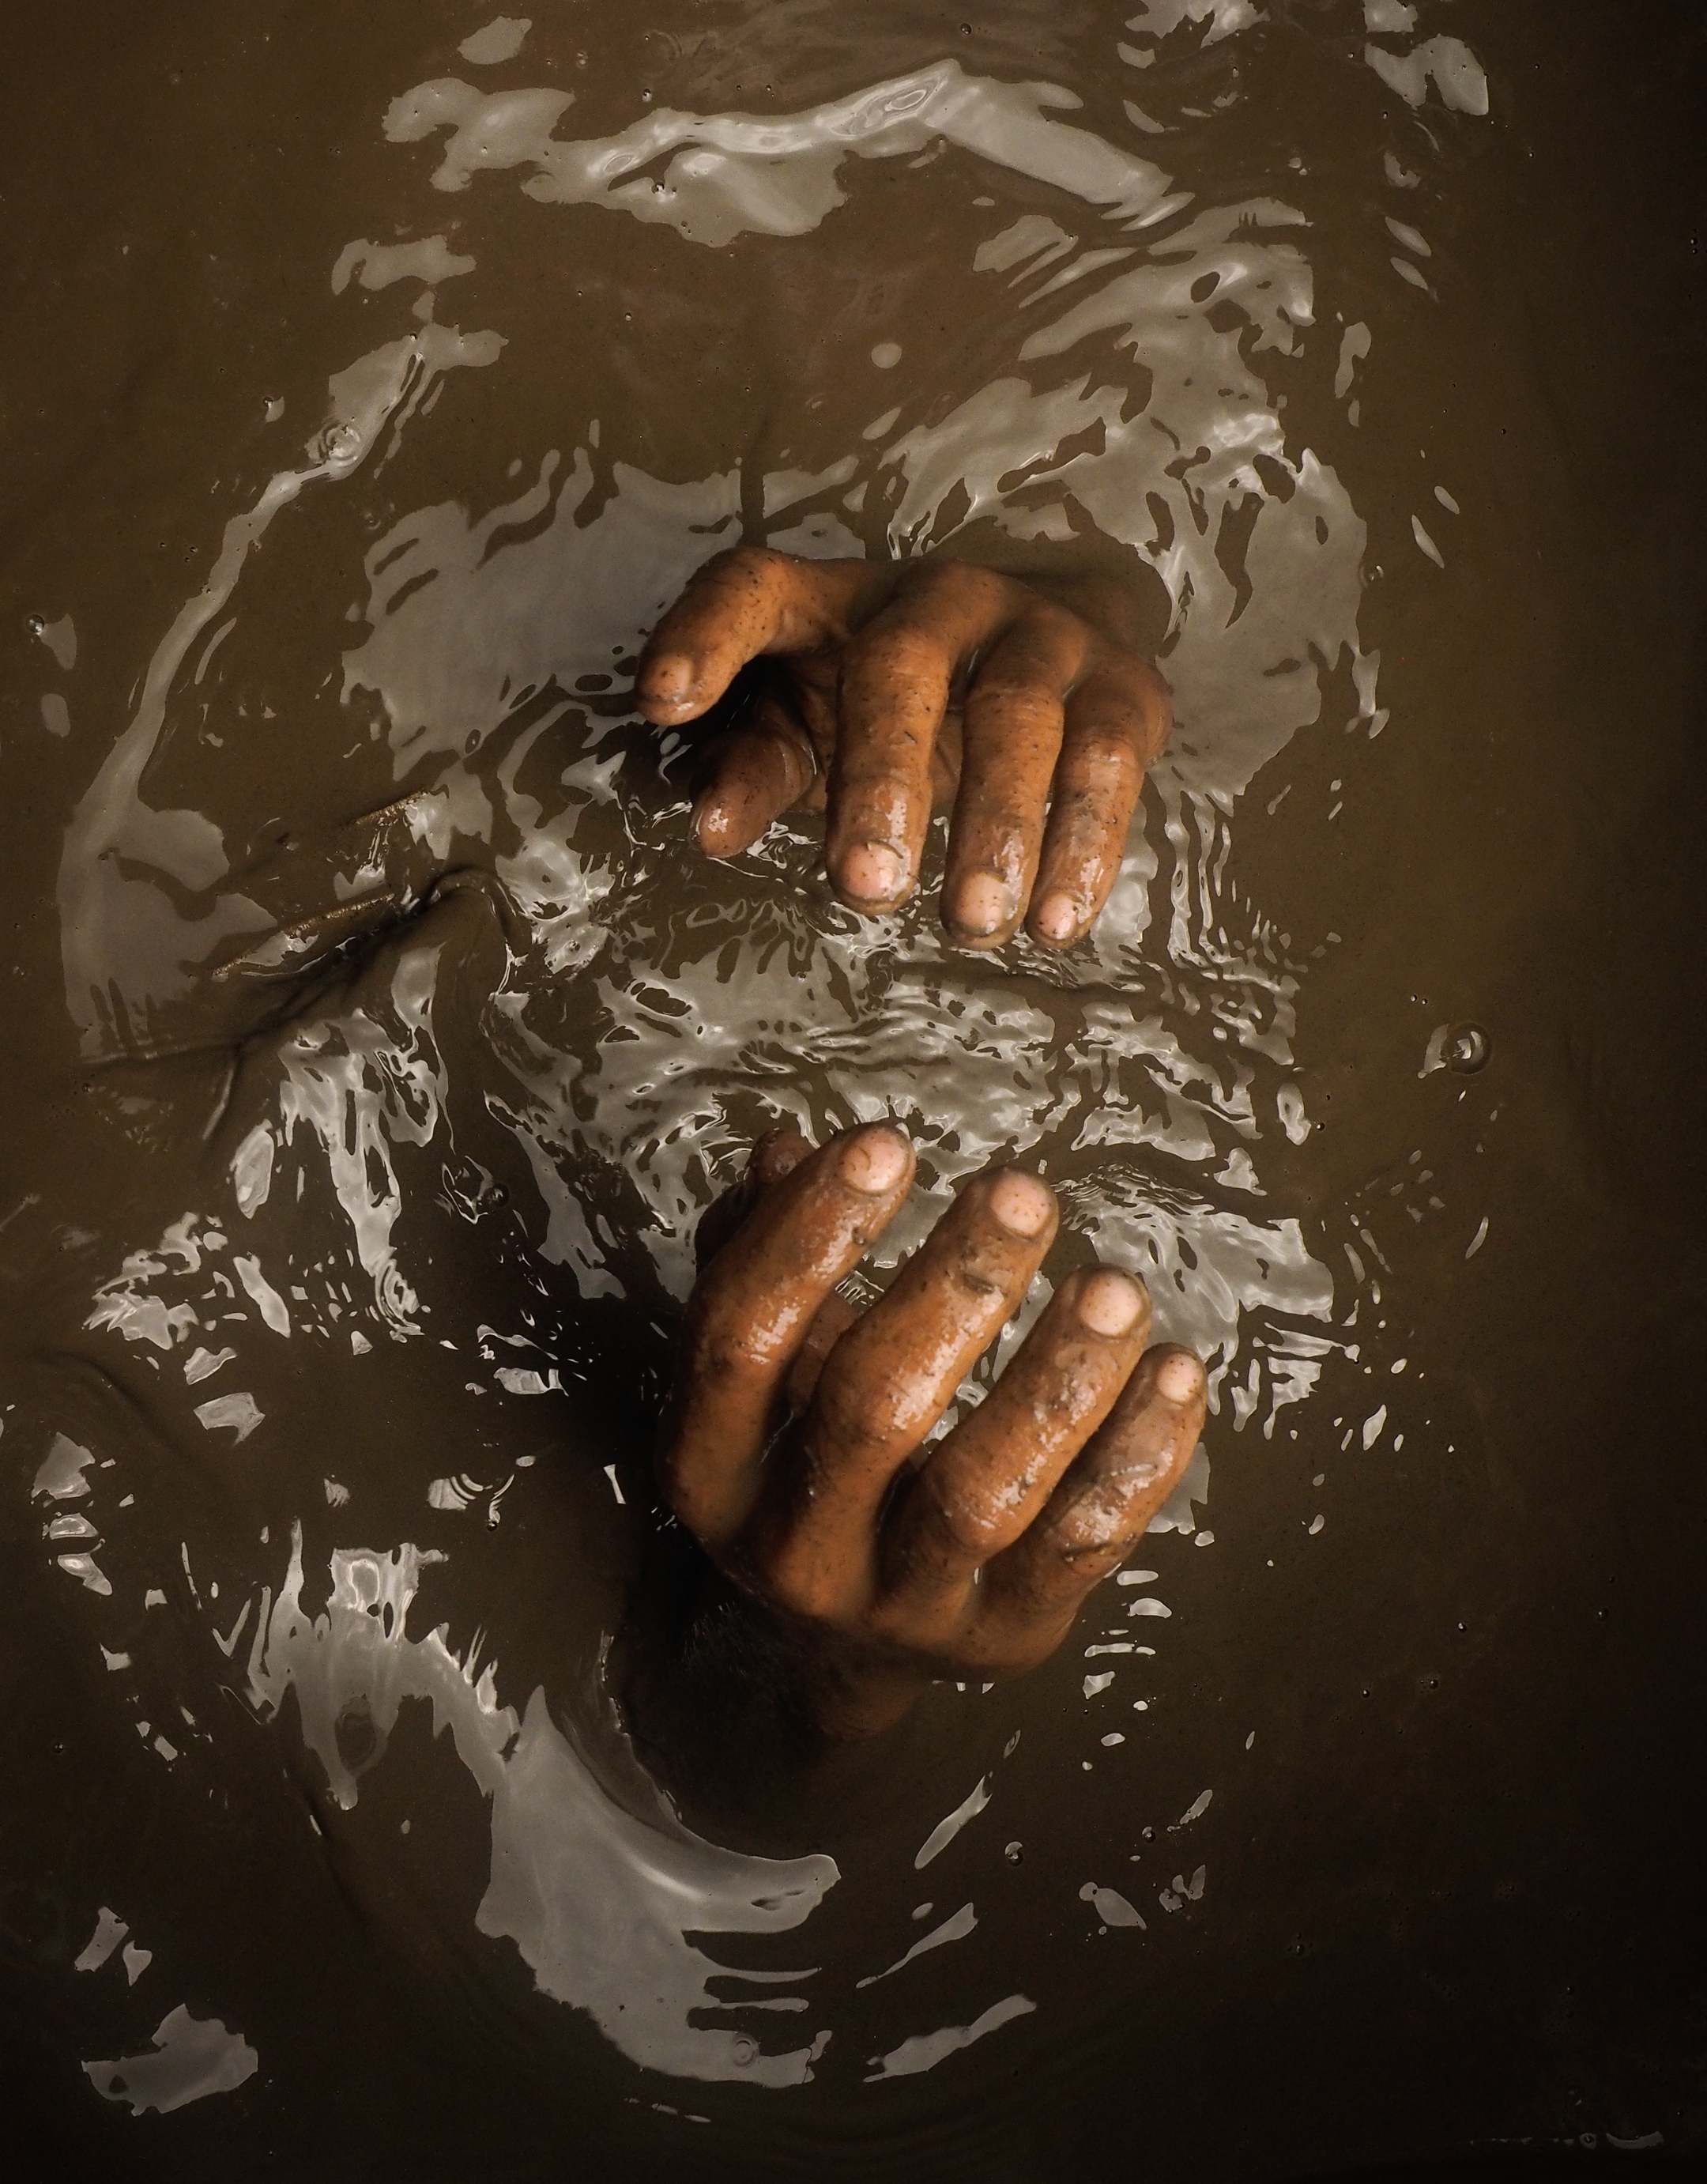 Here, a compressor miner sinks below the muddy water to begin another dive for ore that can last two or more hours. Image by Larry C. Price. Philippines, 2013.